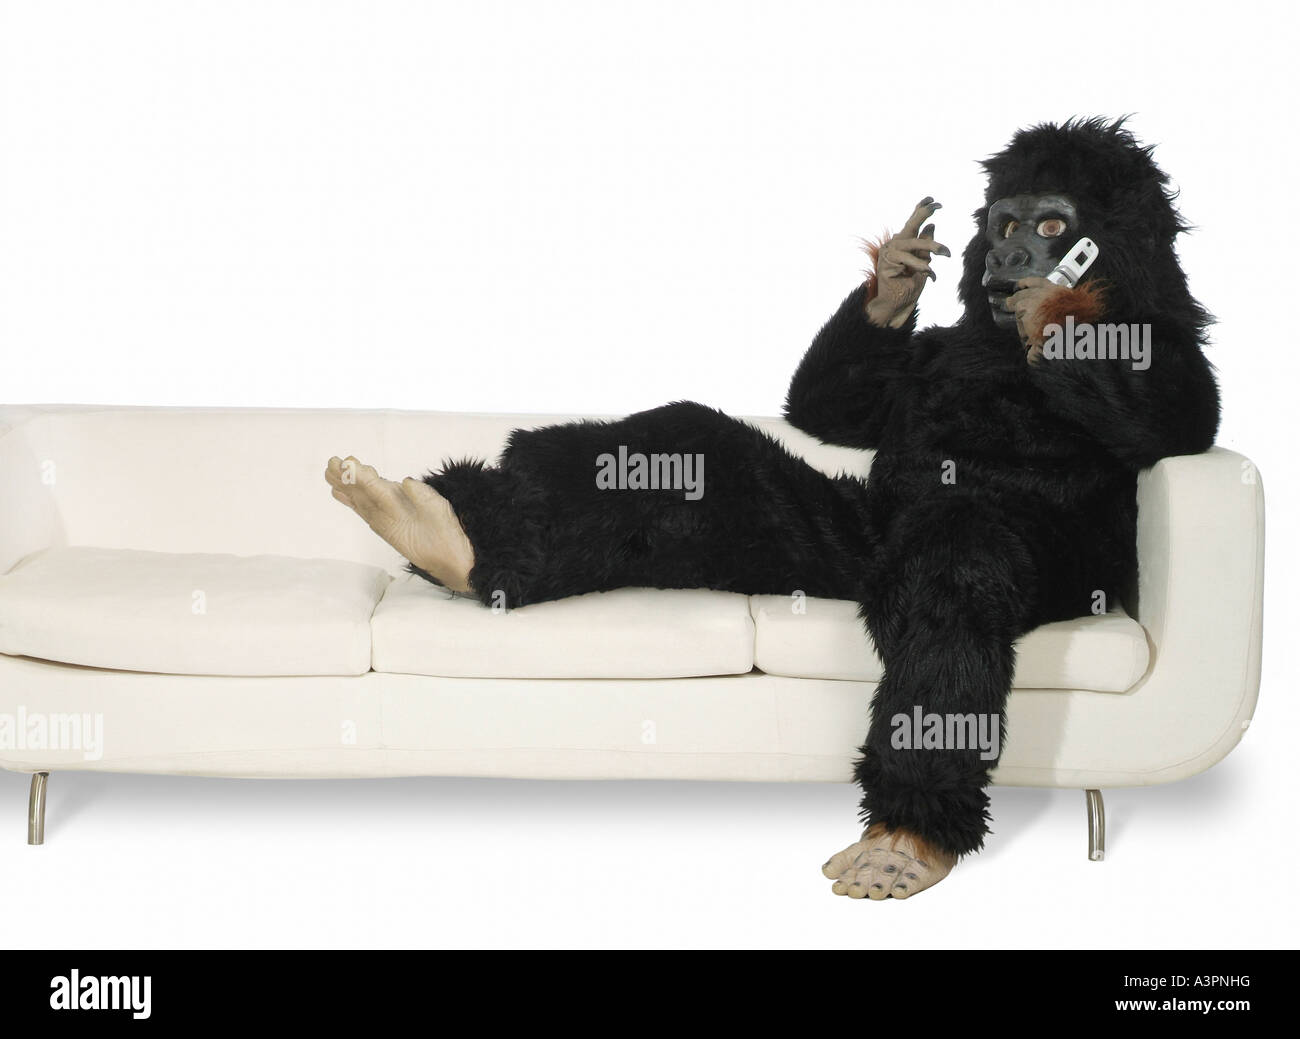 Man dressed up in a gorilla costume sitting on a sofa and making a phone call Stock Photo